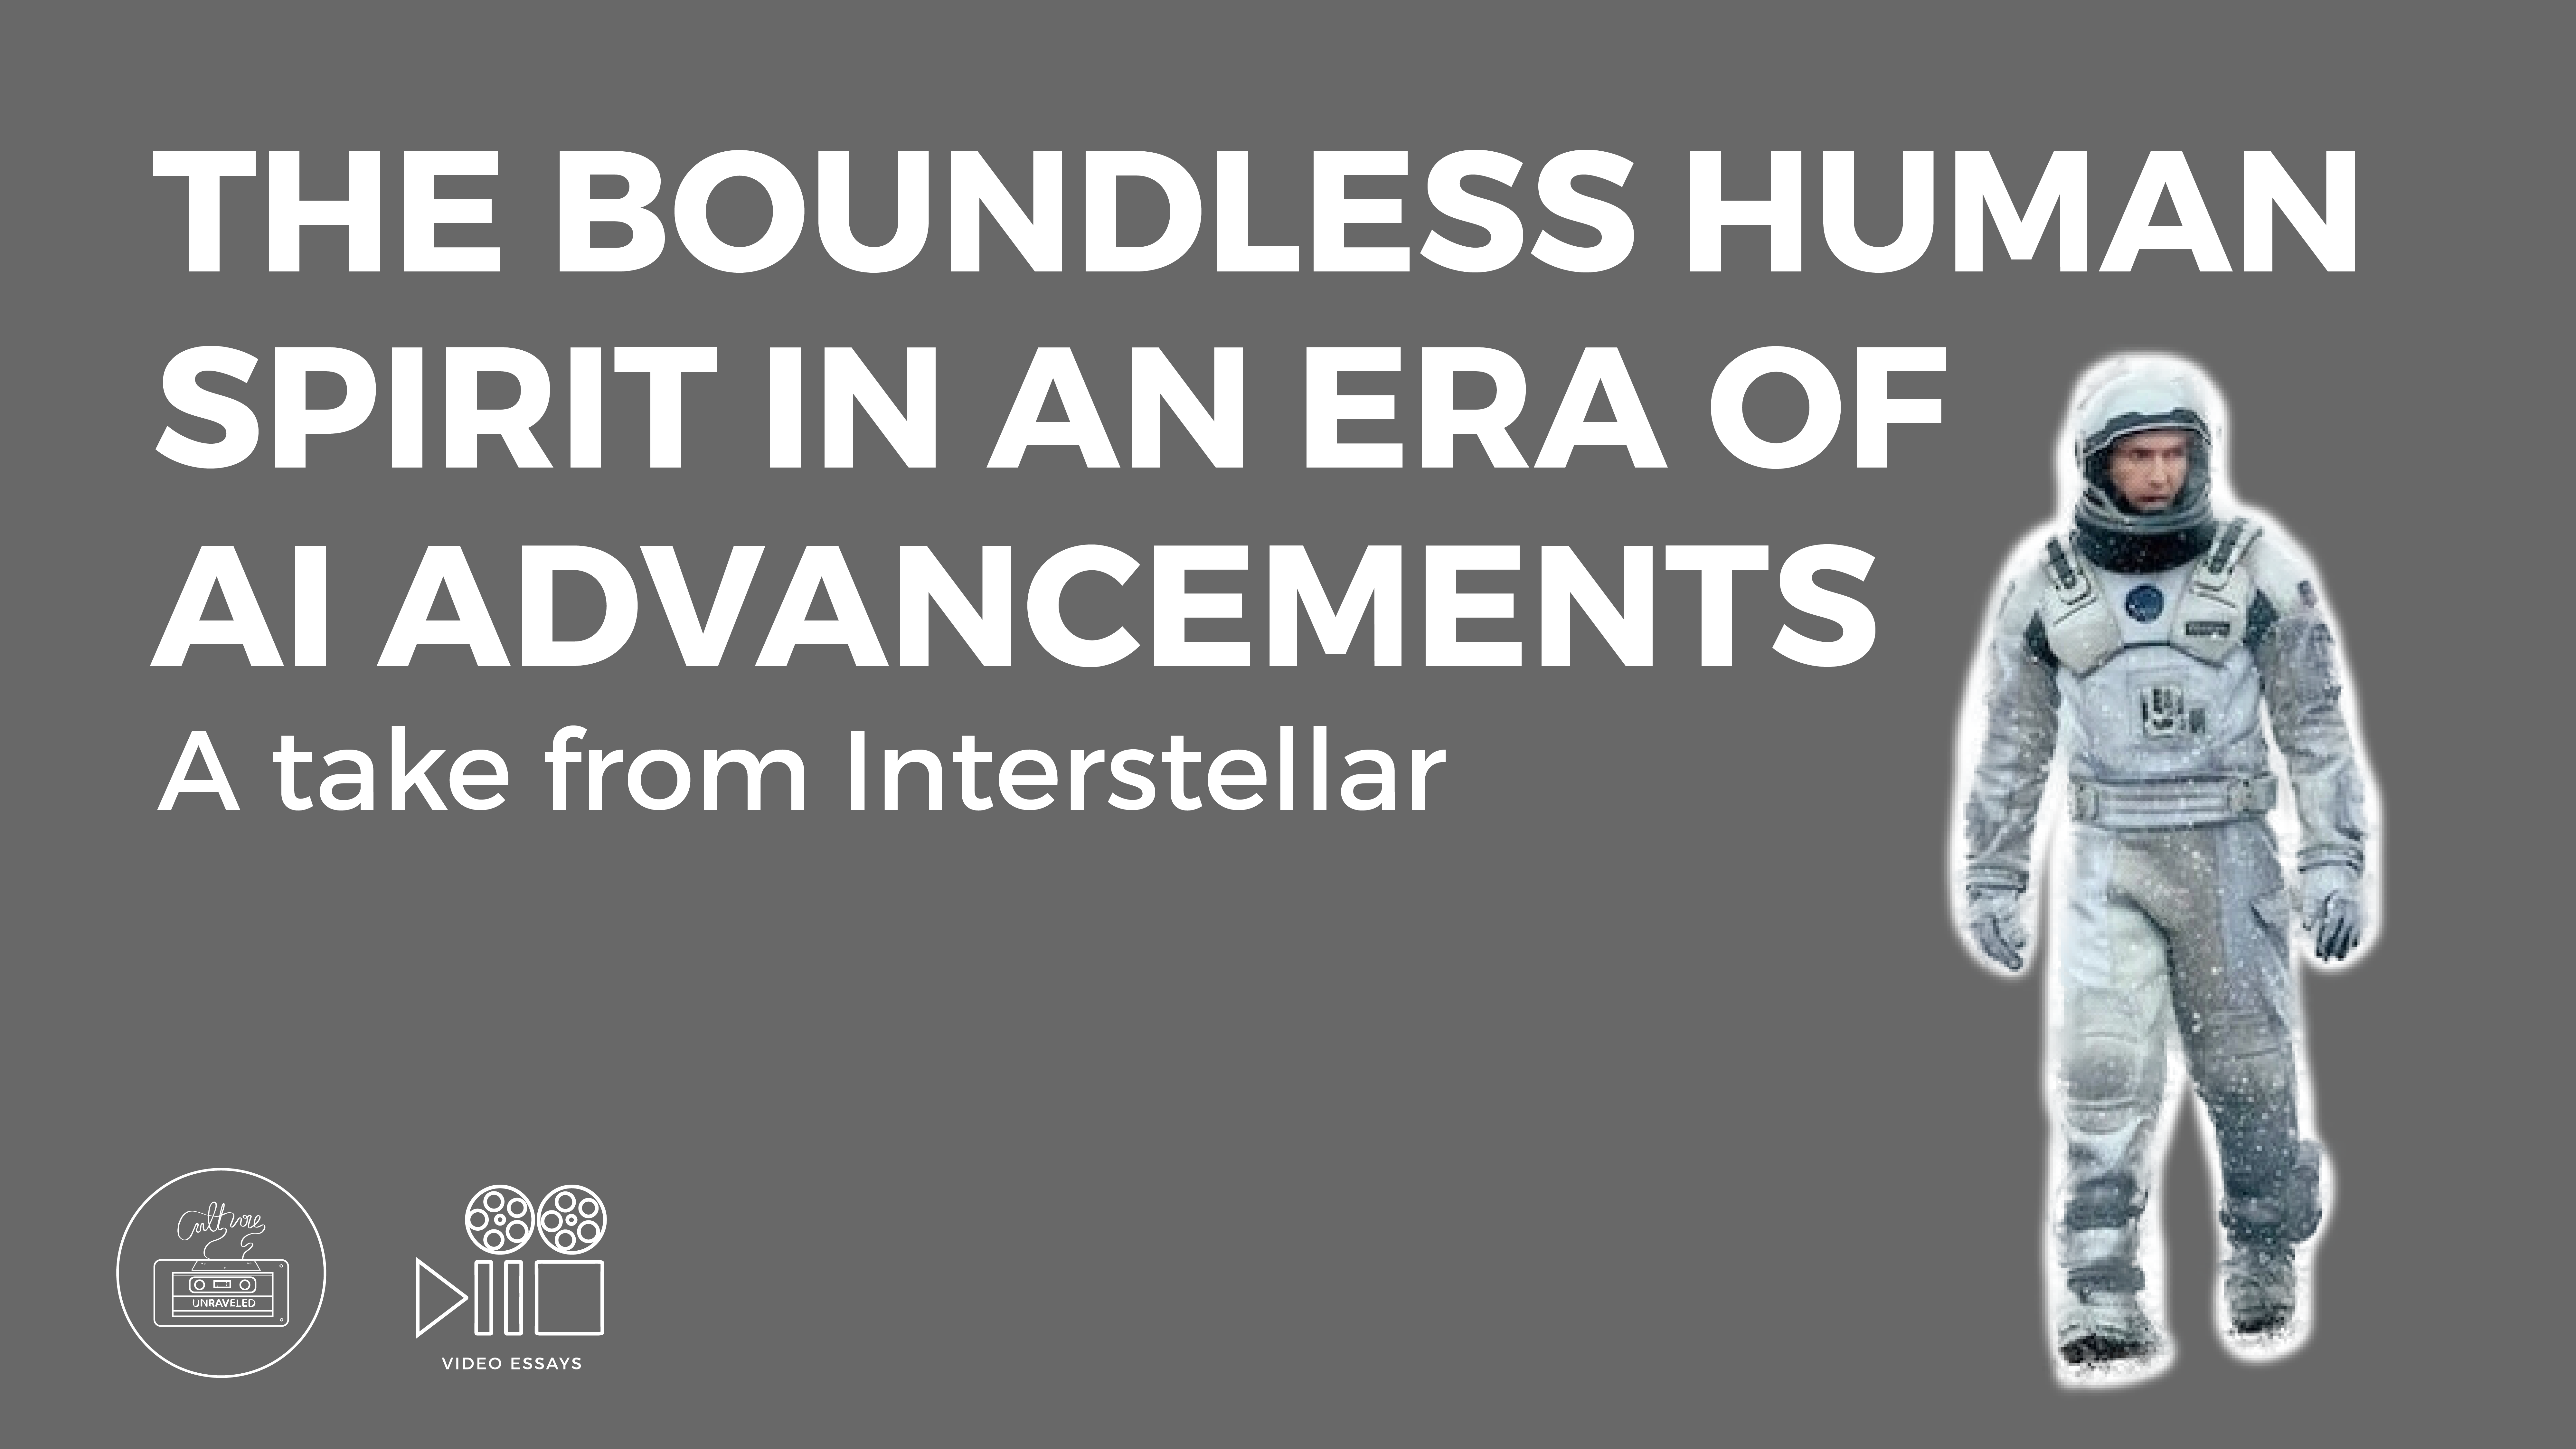 The Boundless Human Spirit in an Era of AI Advancements. A Take from Interstellar